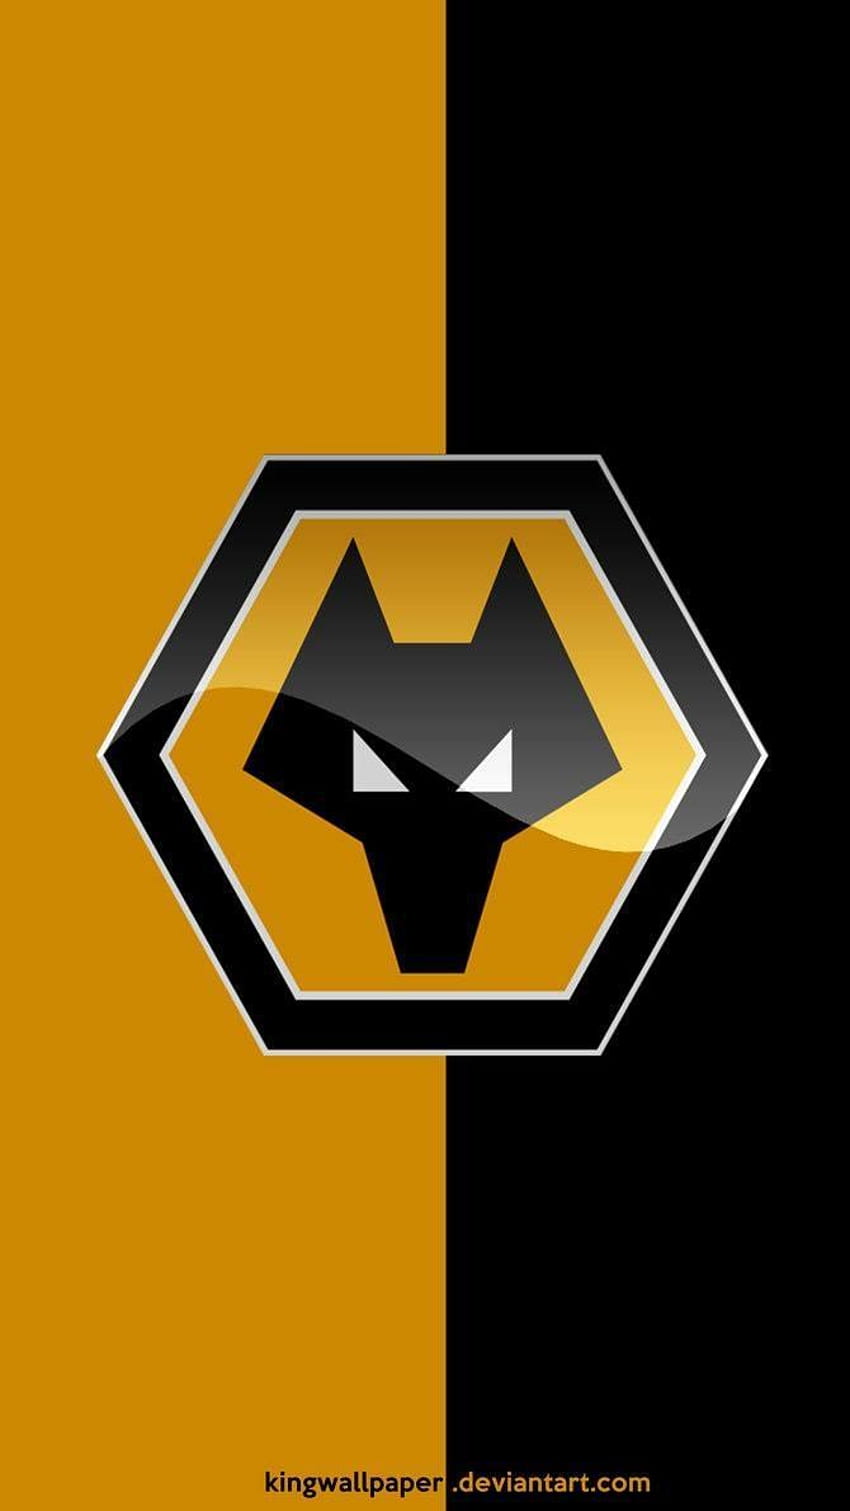 Wolves FC for Android, Wolverhampton Wanderers F.C. HD phone wallpaper